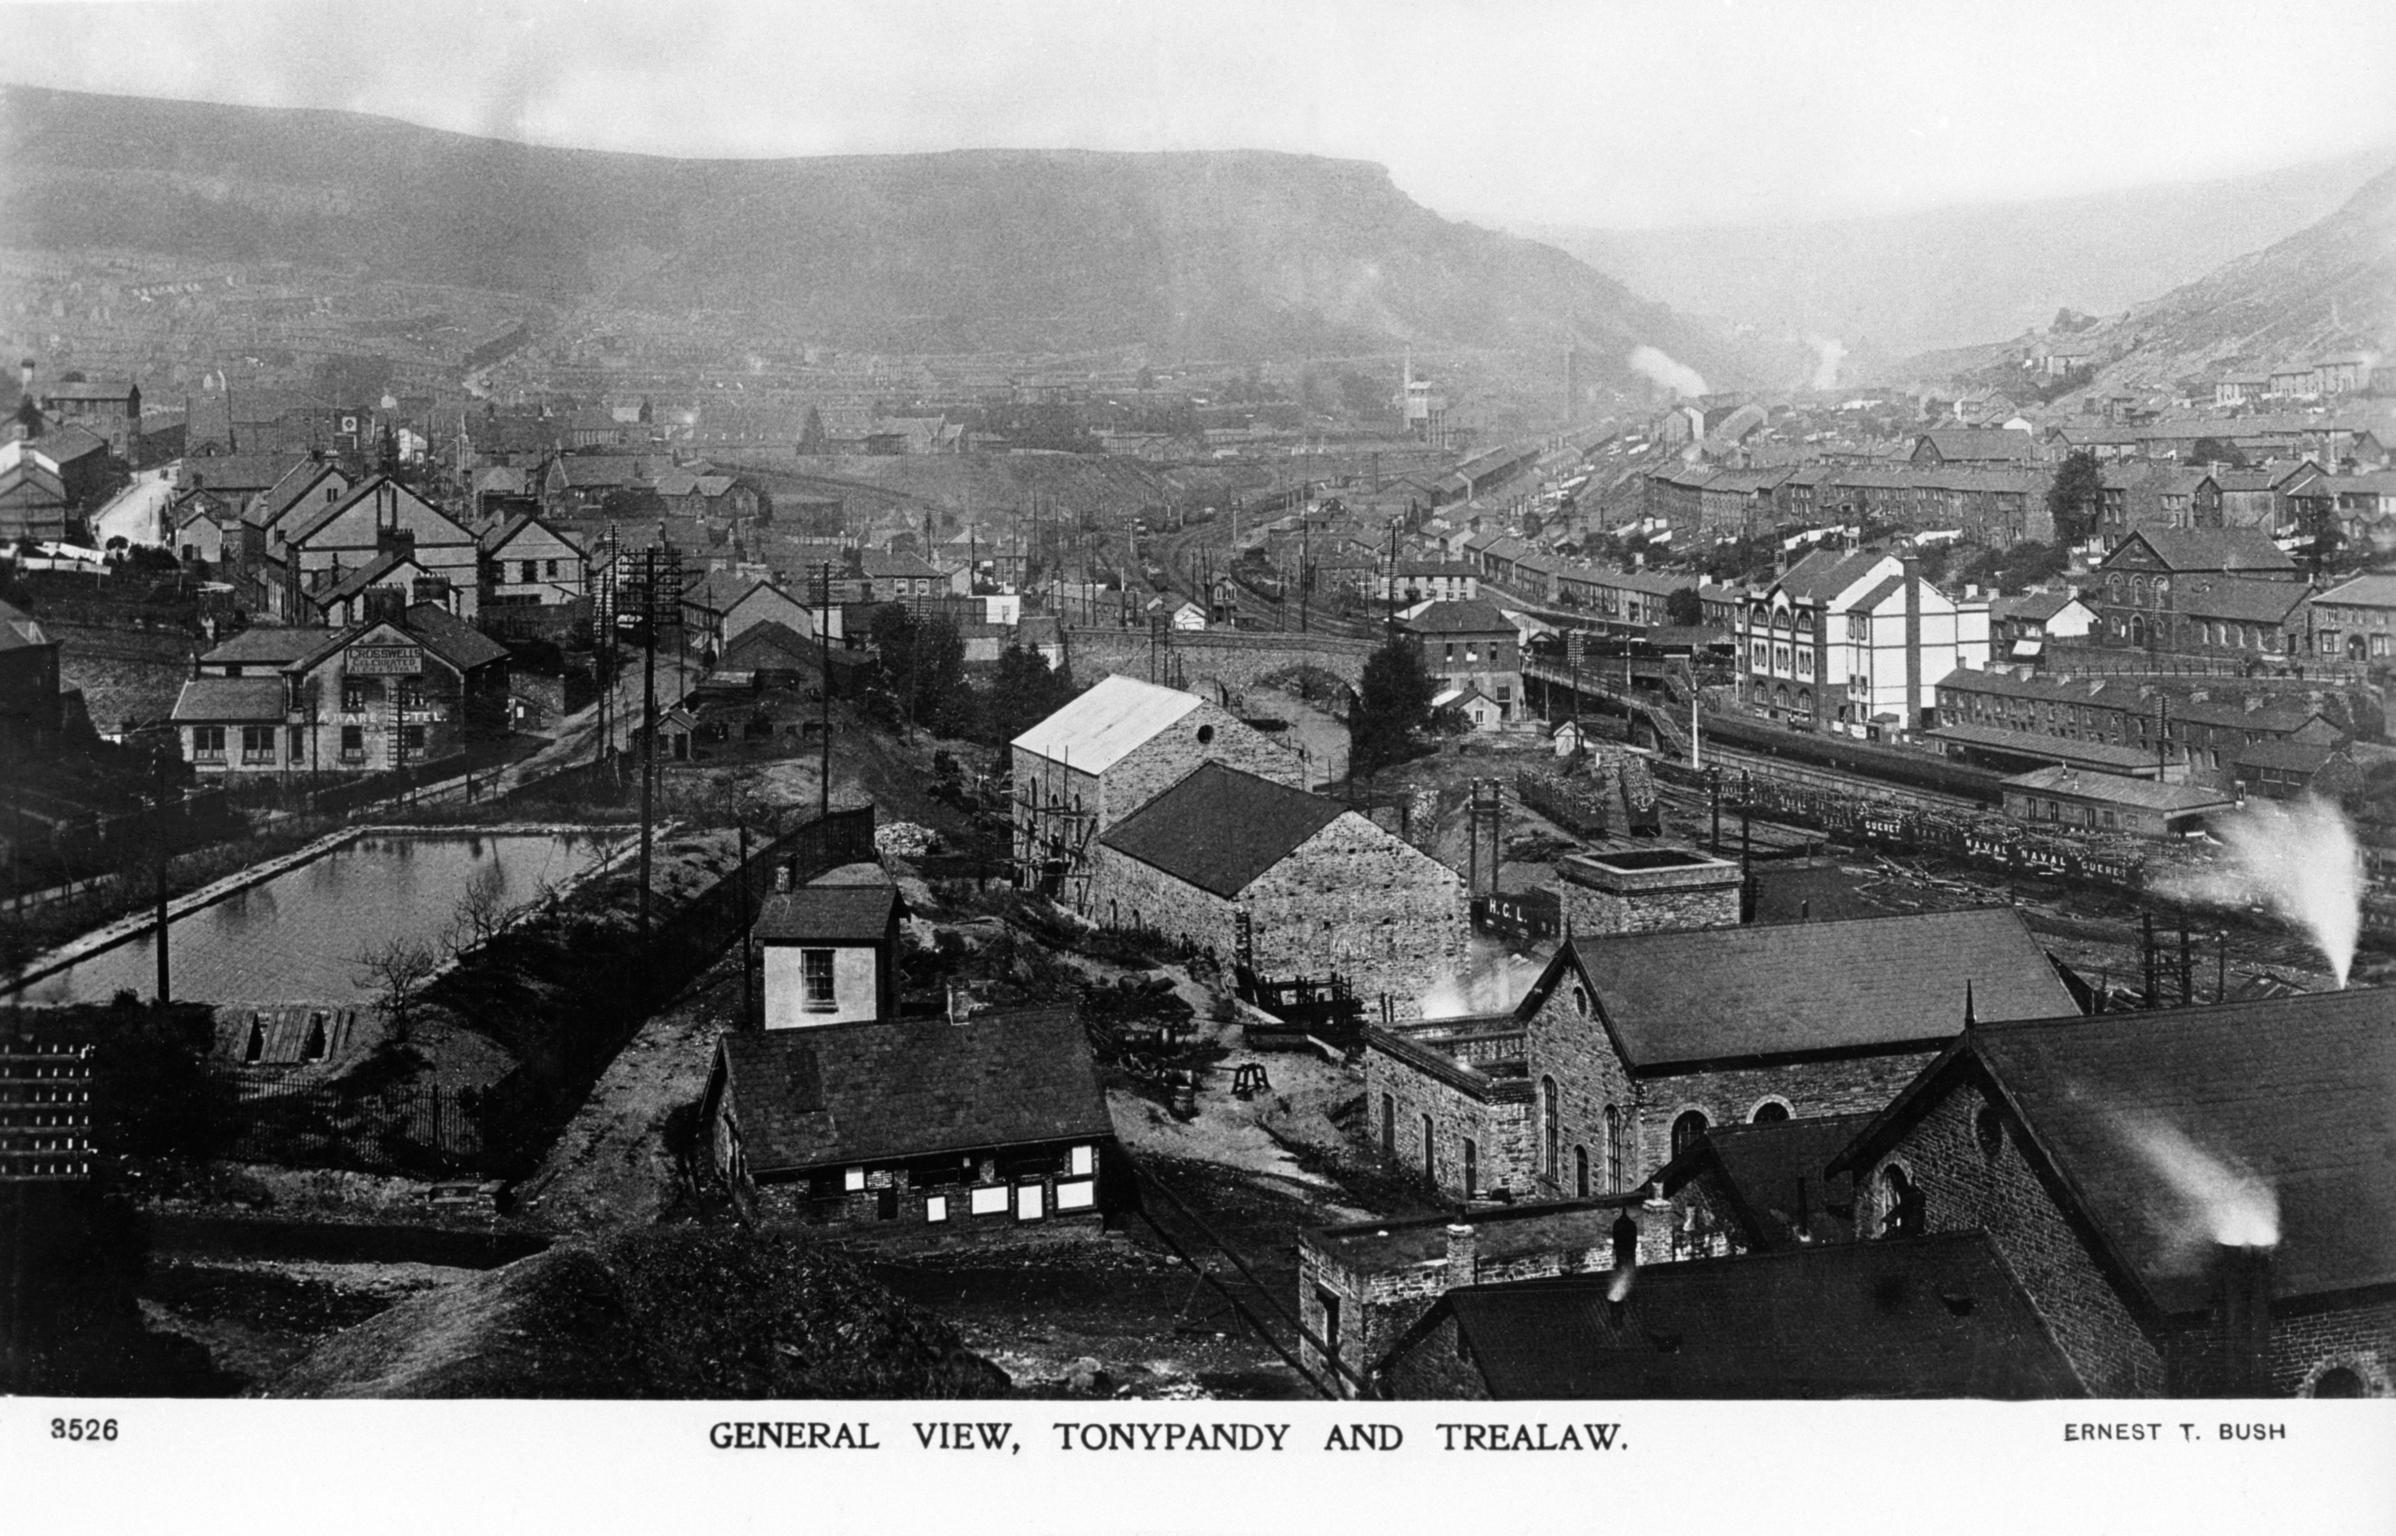 General View, Tonypandy and Trealaw (postcard)